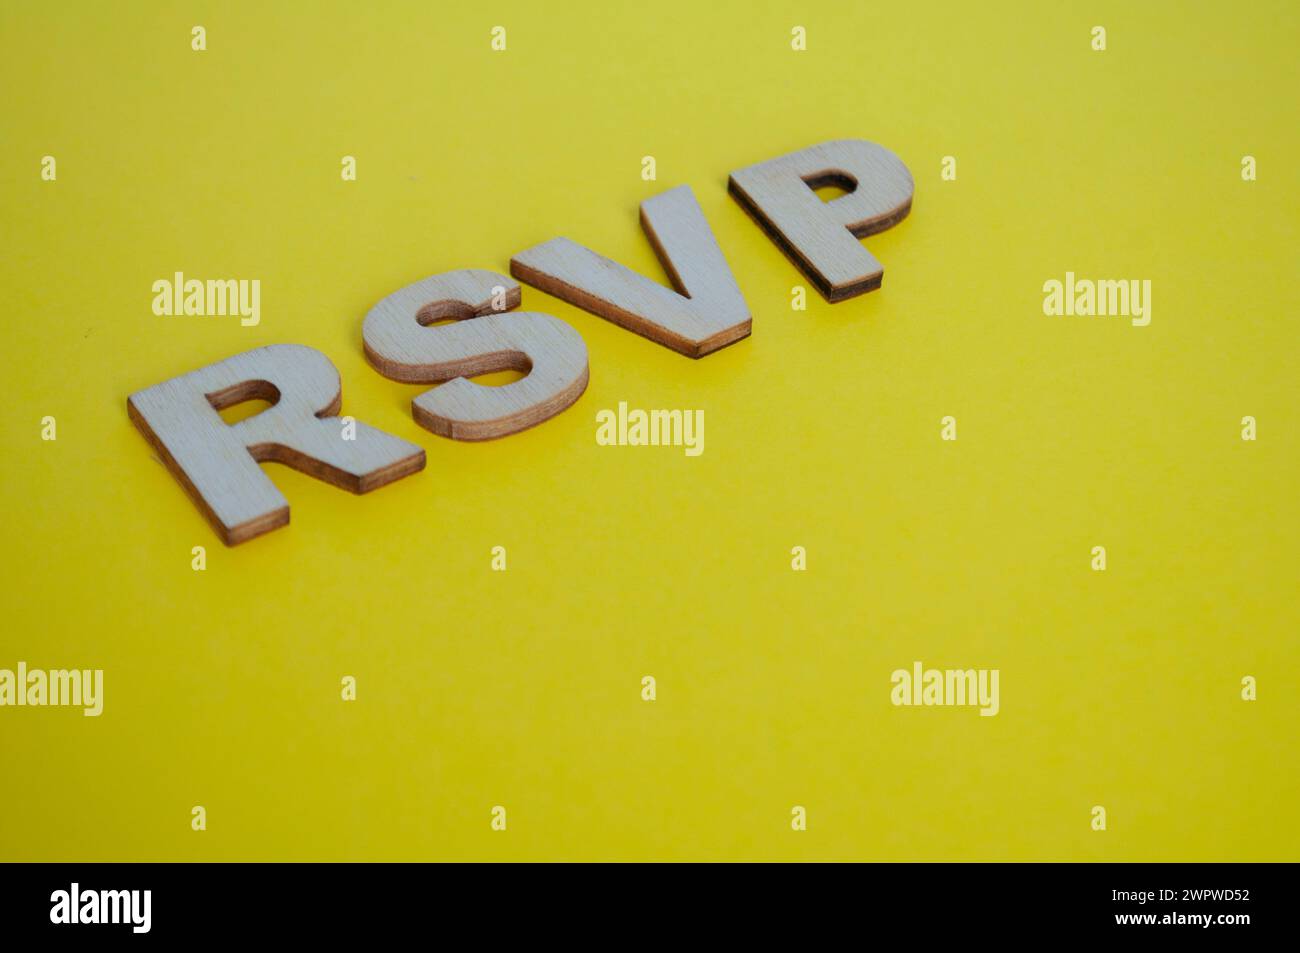 RSVP wooden letters representing Please respond on yellow background. Stock Photo